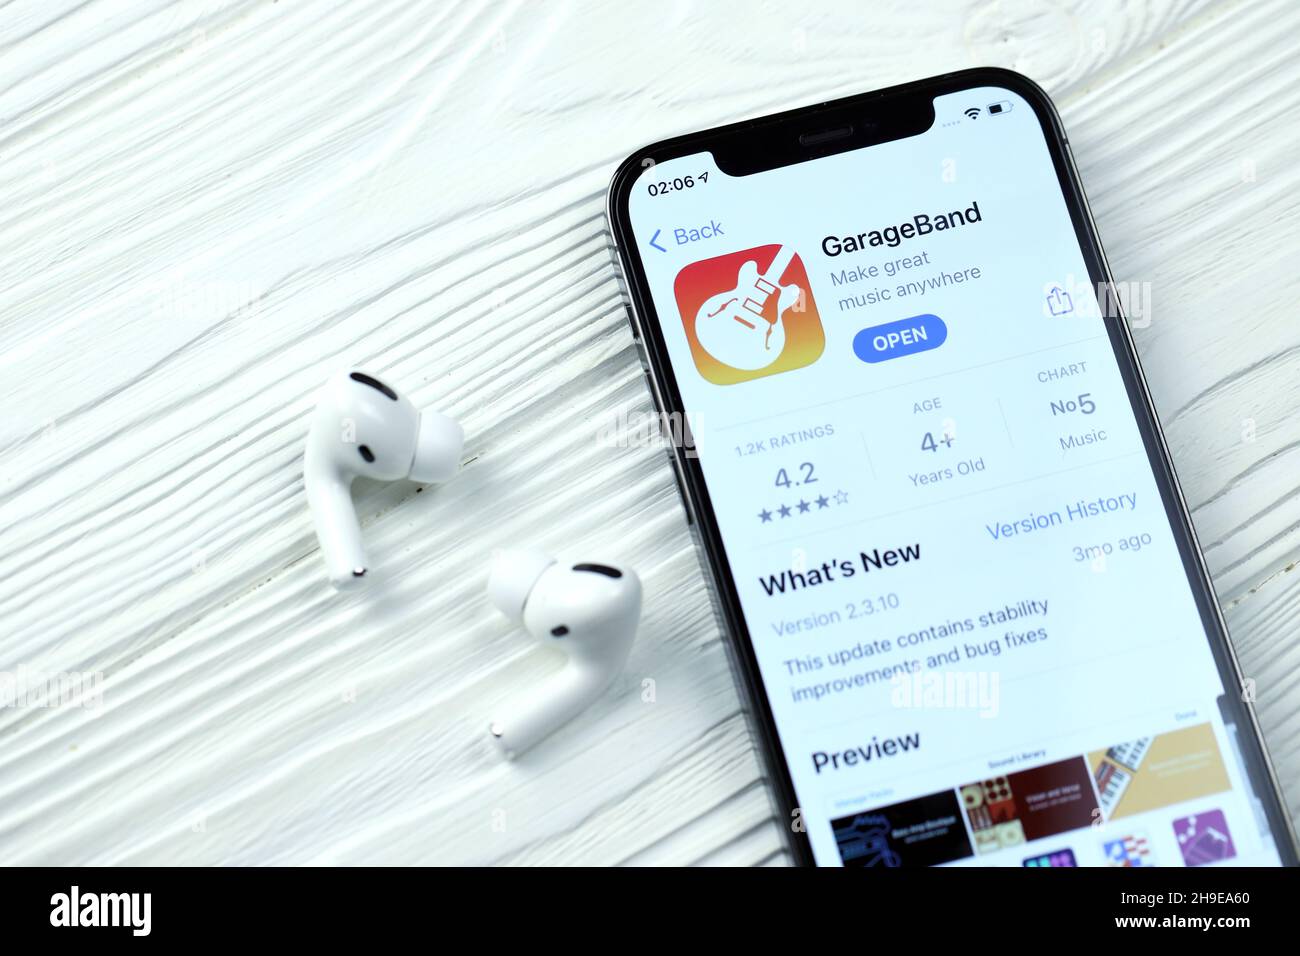 KHARKOV, UKRAINE - MARCH 5, 2021: Garageband for artists icon and application from App store on iPhone 12 pro display screen with airpods pro on white Stock Photo